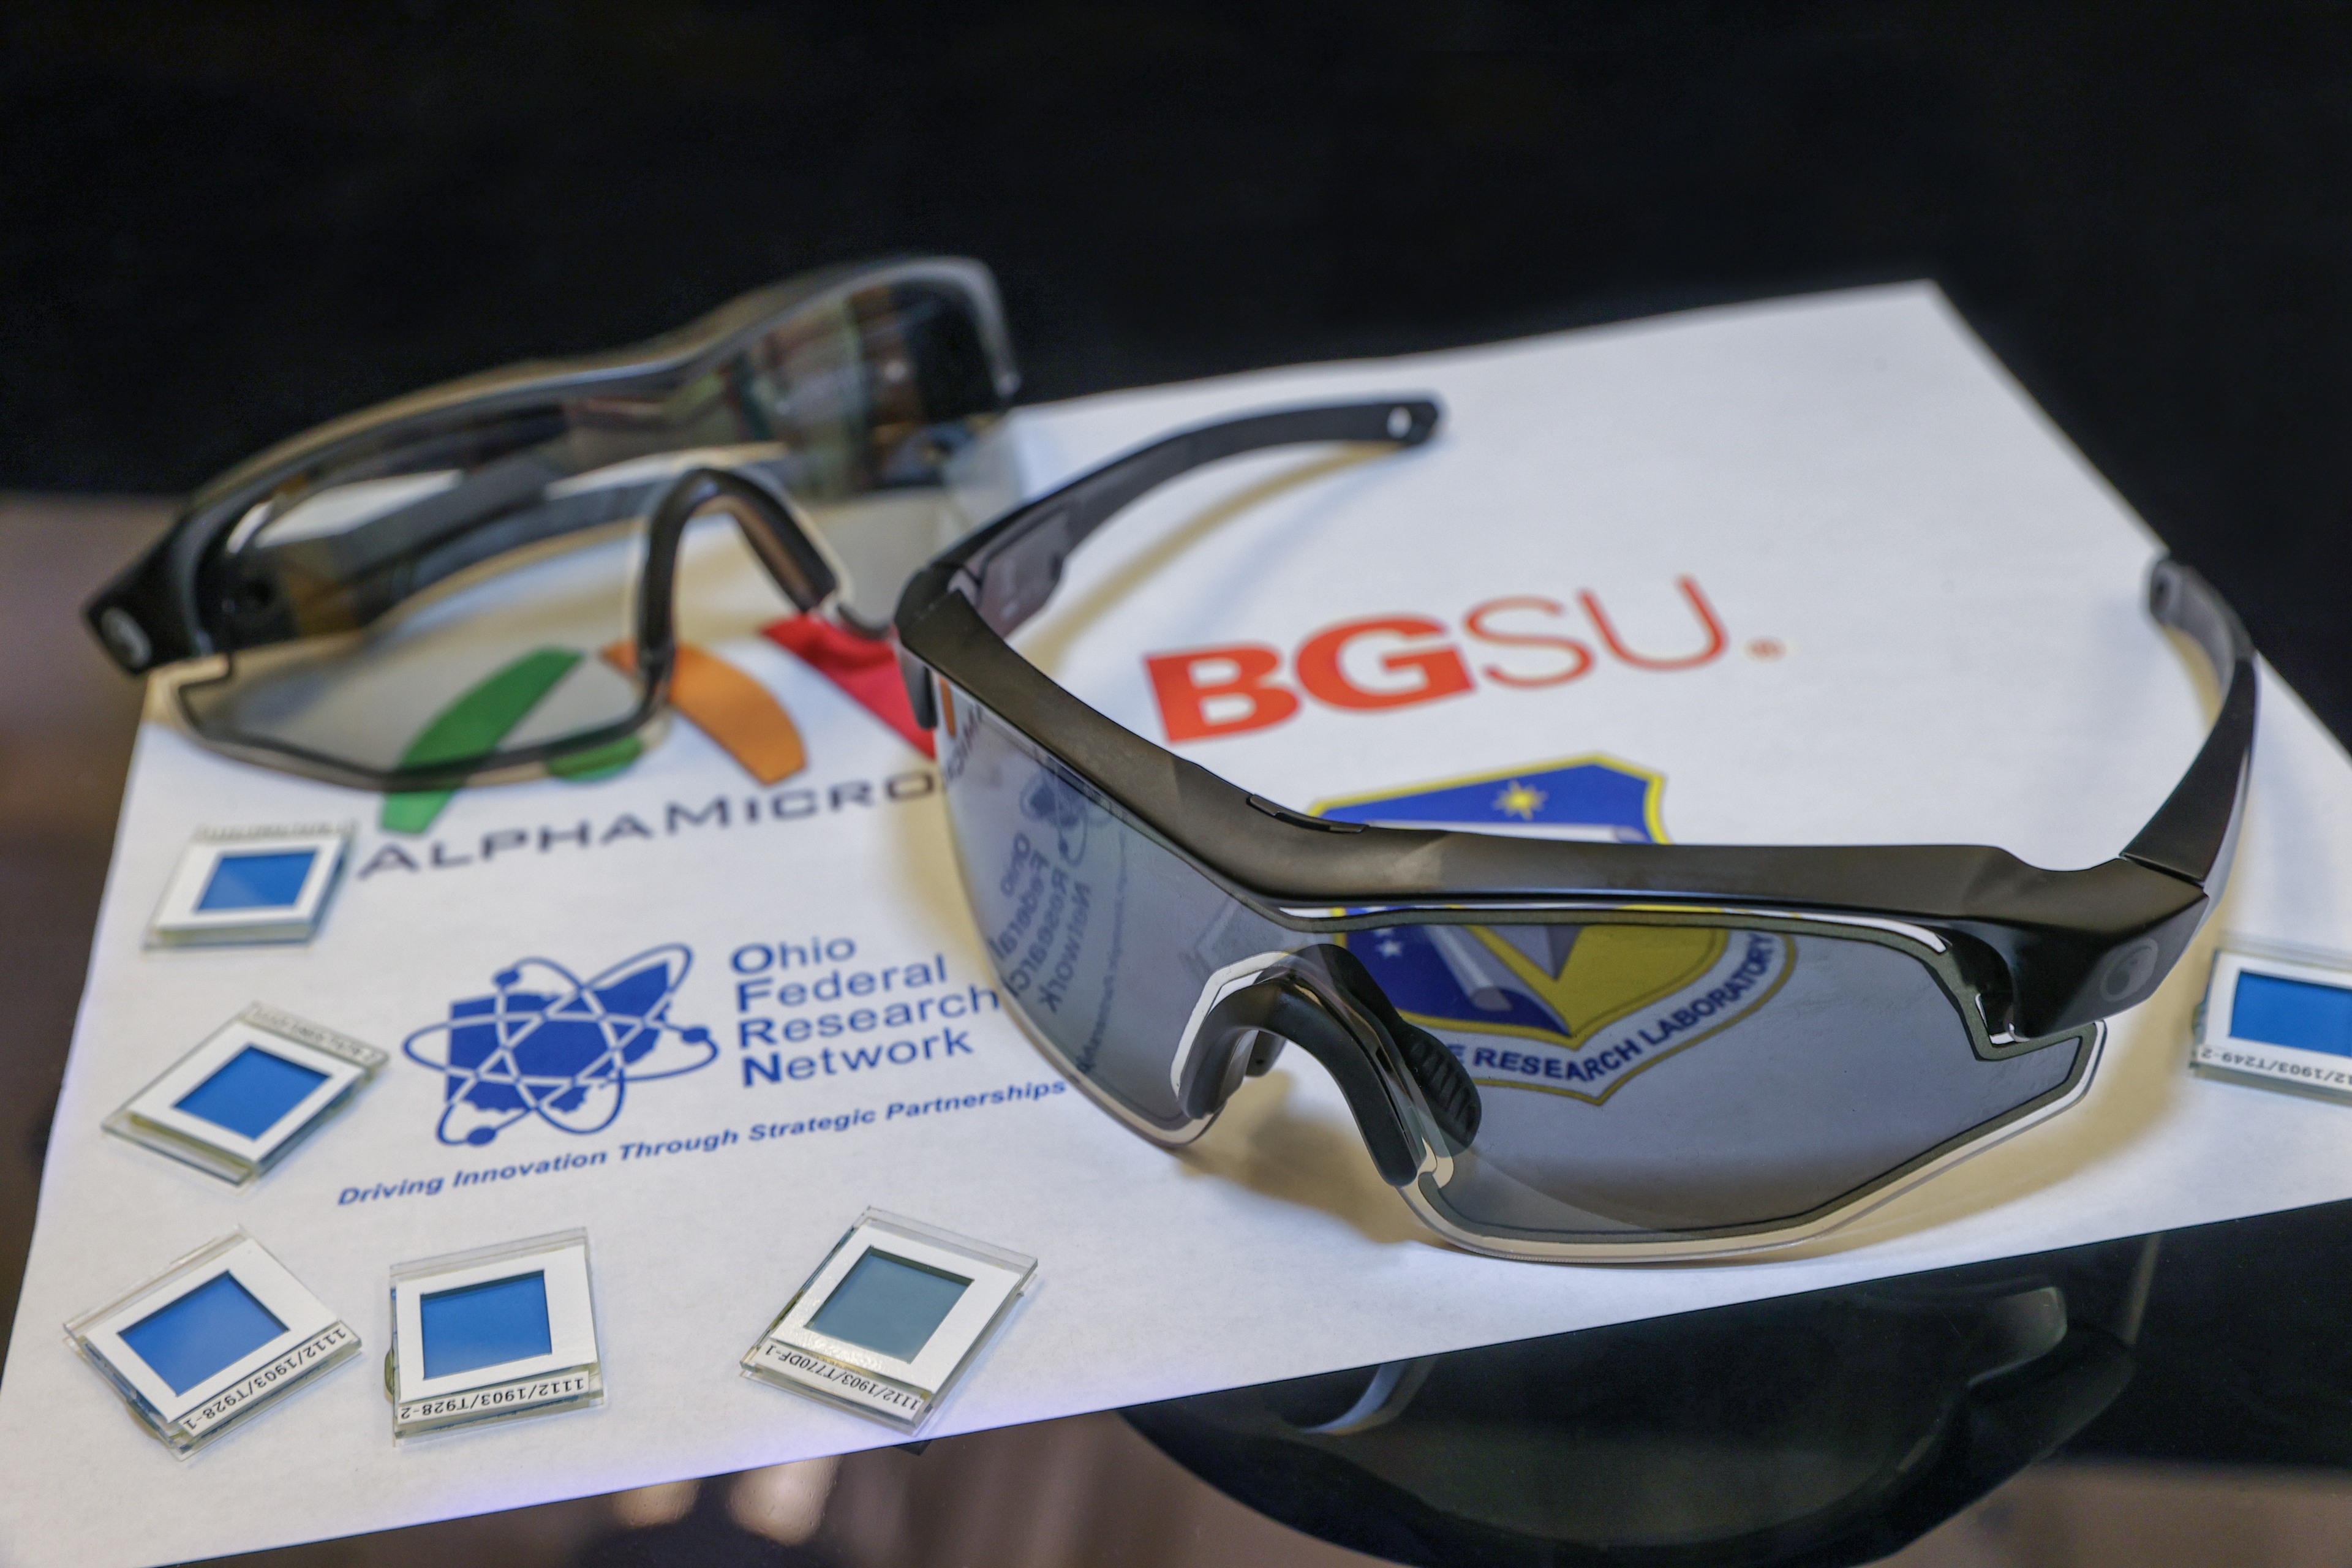 two pair of eyewear sitting on a paper with logos of BGSU, AlphaMicron, Ohio Federal Research Network, Air Force Research Laboratory 